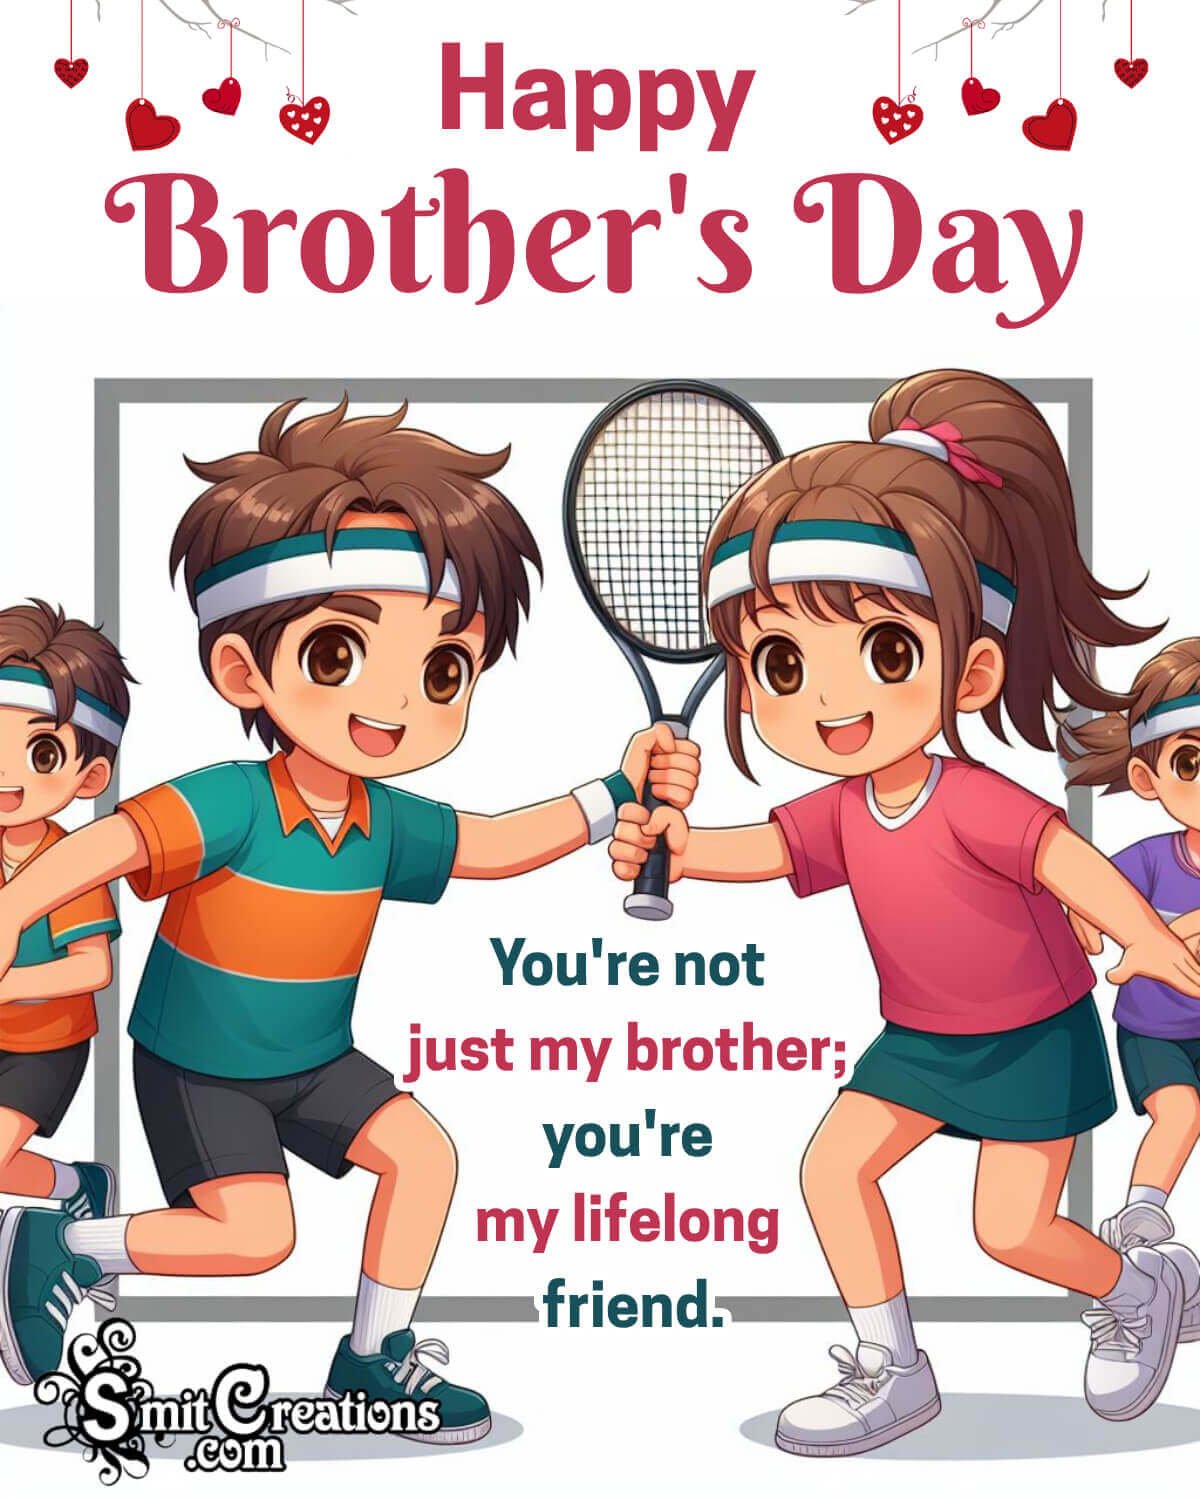 Happy Brothers Day Message Image